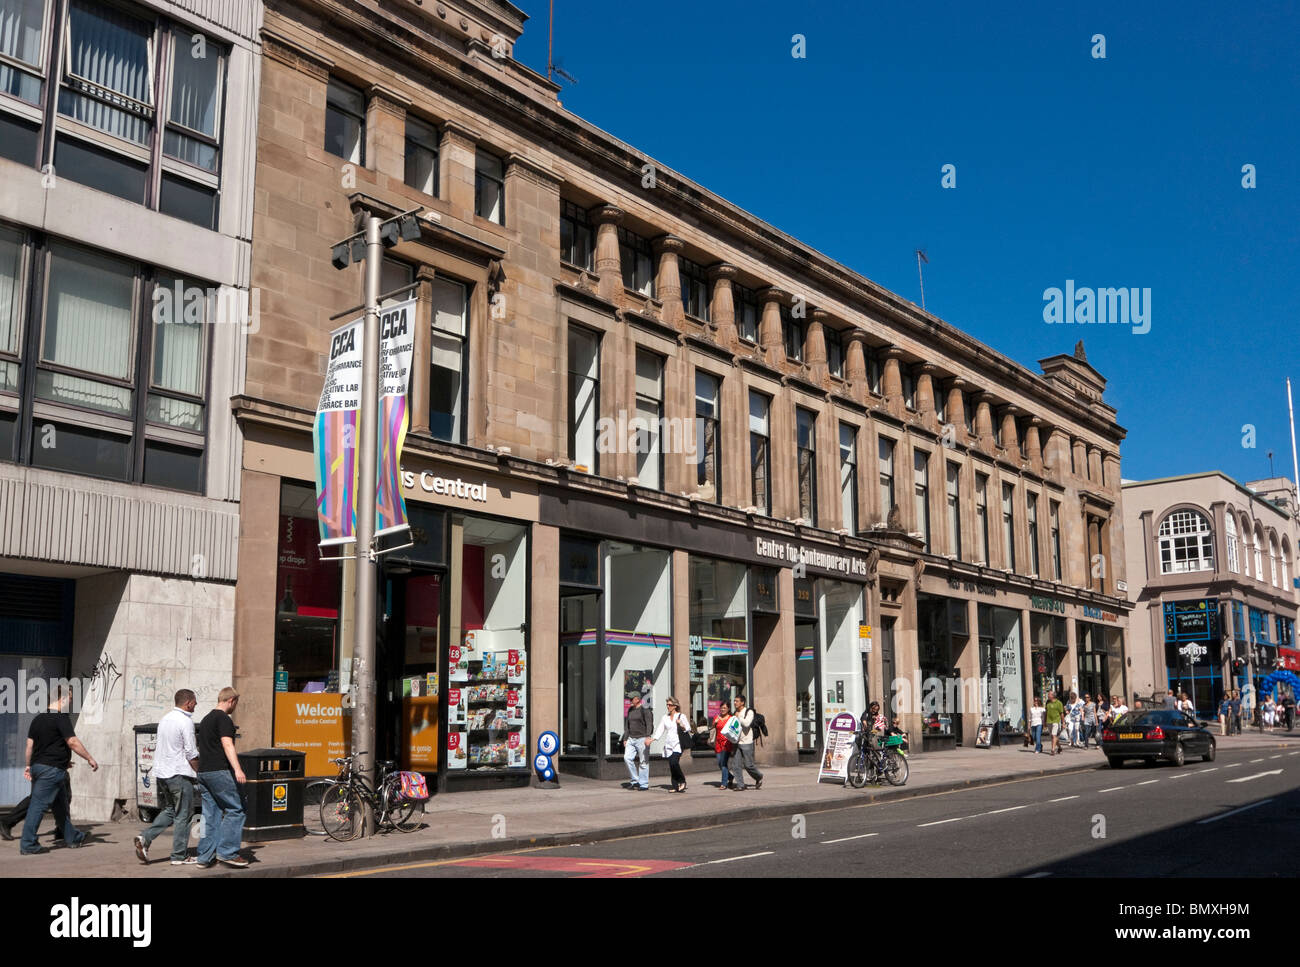 Sauchiehall Street Glasgow High Resolution Stock Photography and Images